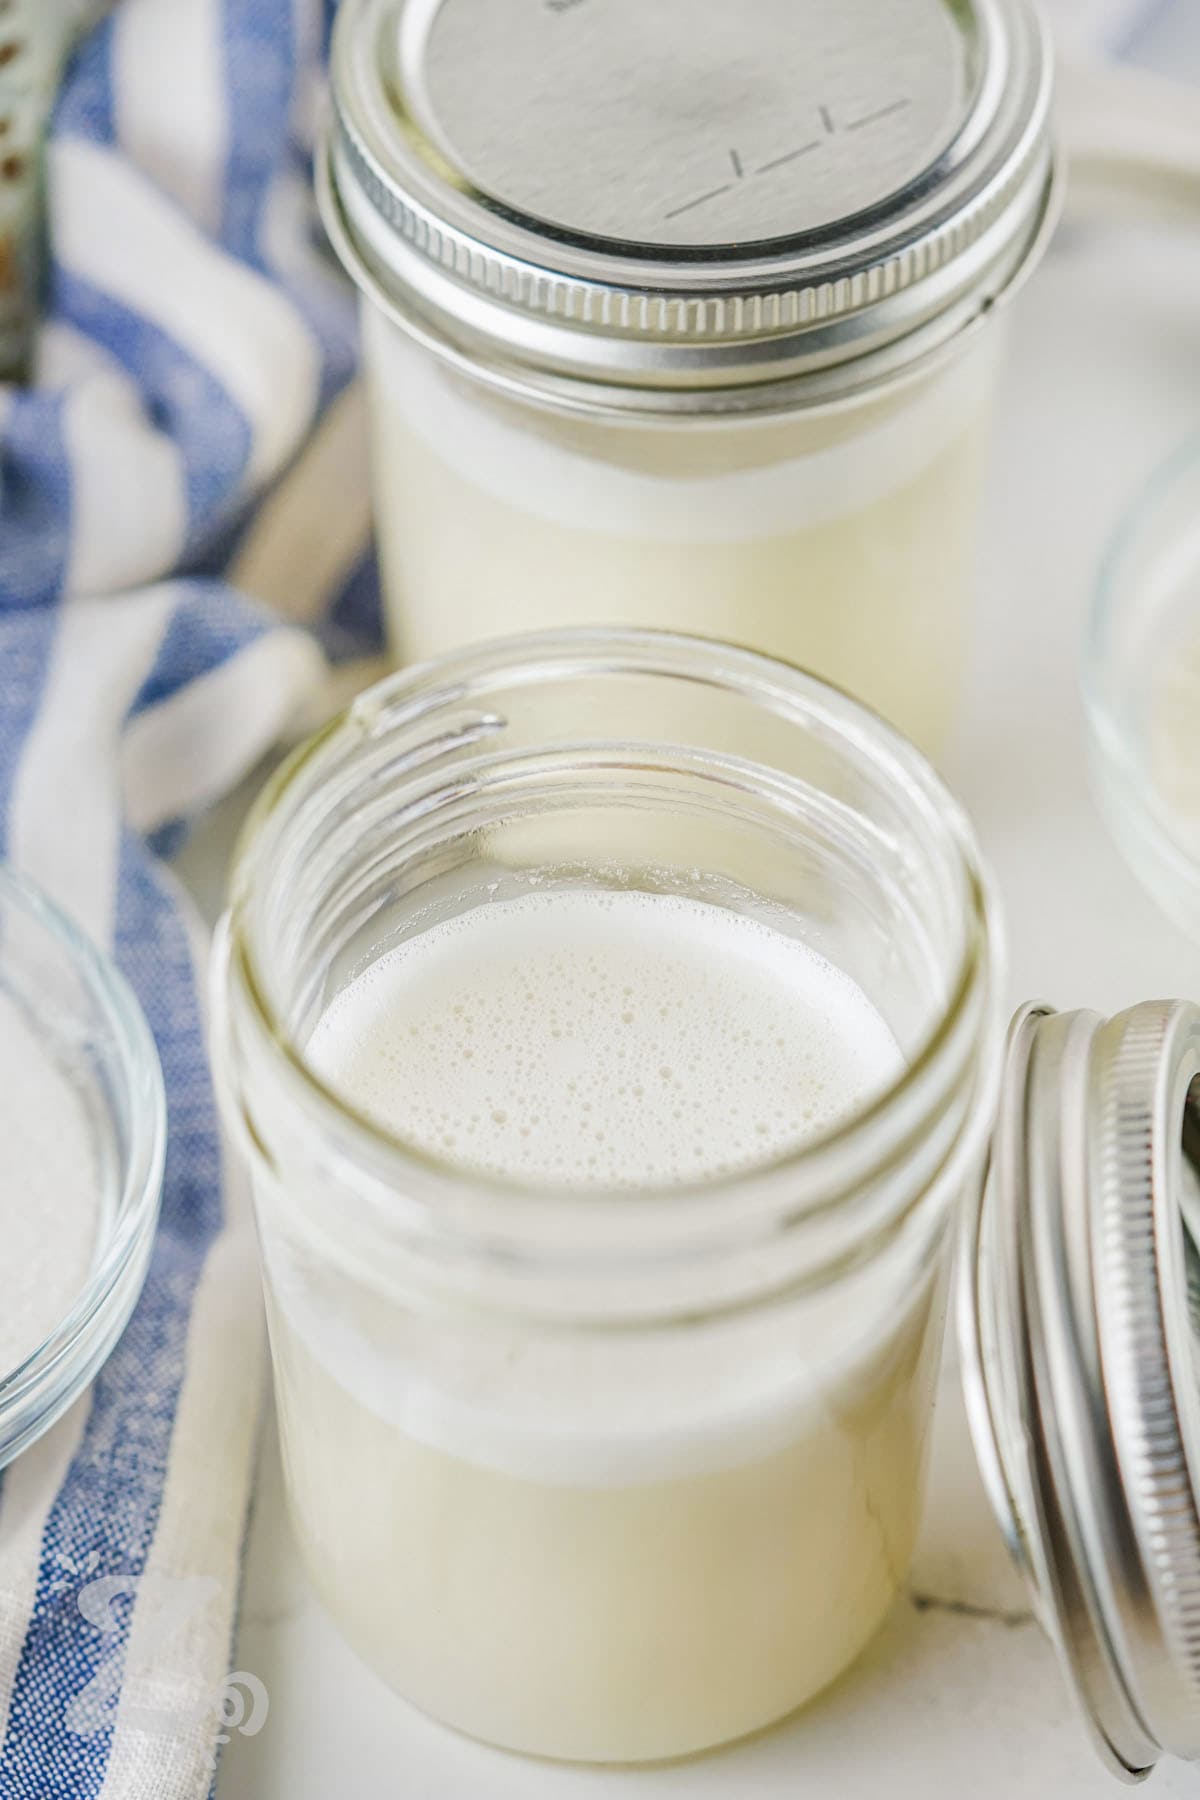 A jar of homemade sweetened condensed milk without a lid on it